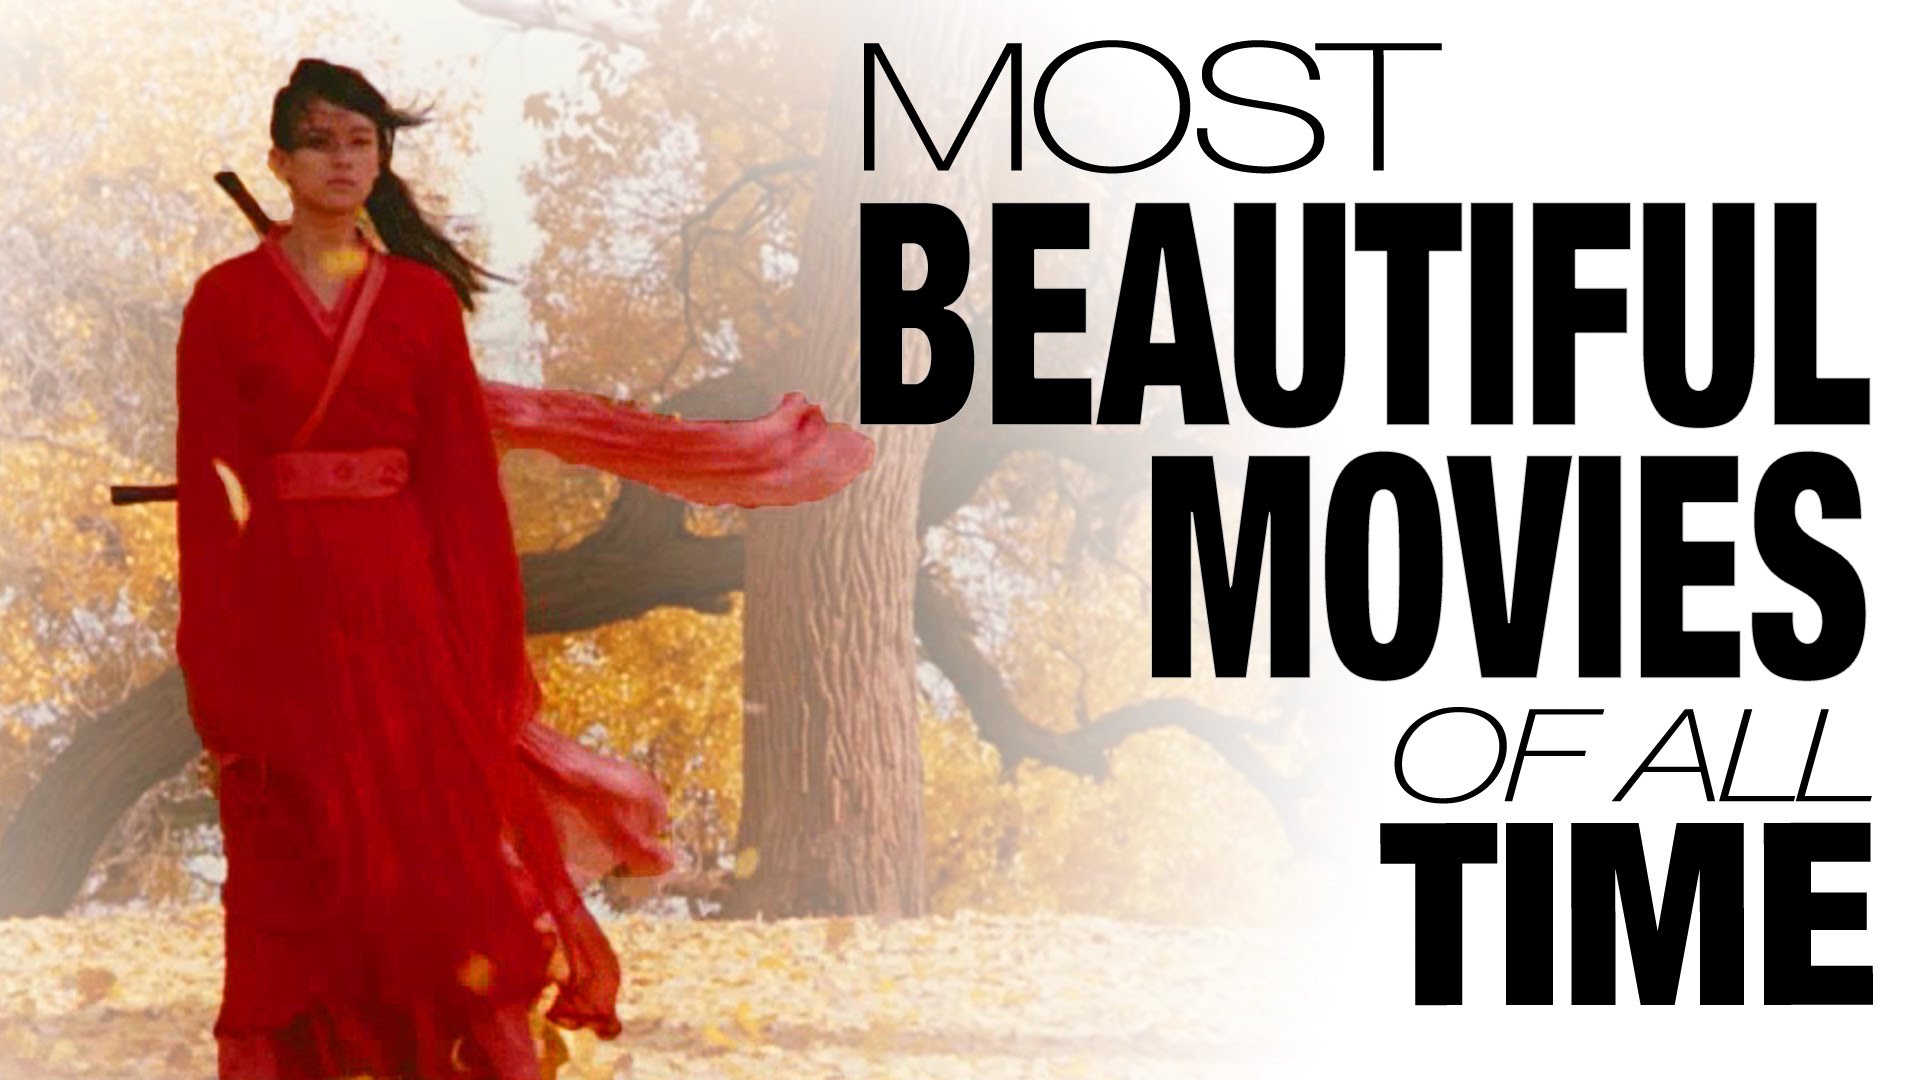 The 10 Most Beautiful Movies